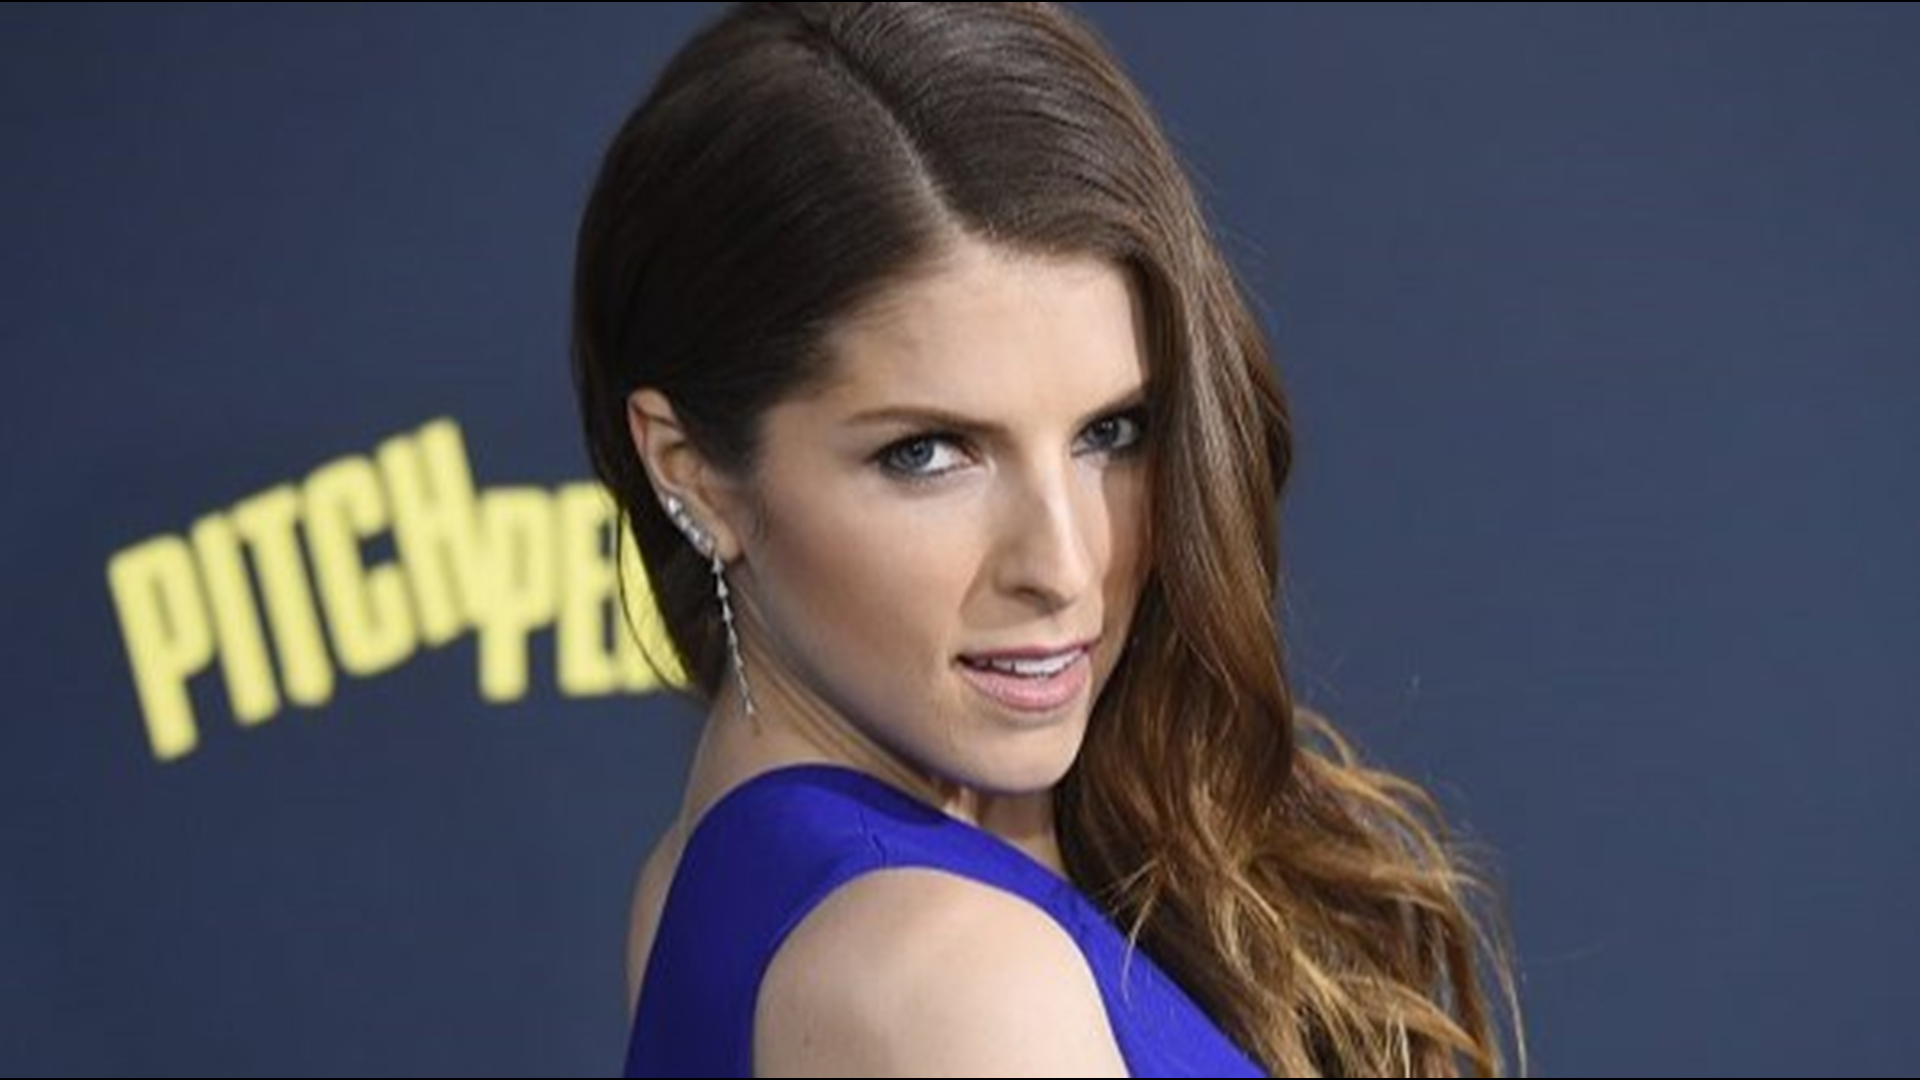 Anna Kendrick announced her directorial debut on social media. She will be directing the upcoming movie "The Dating Game," a true crime thriller.